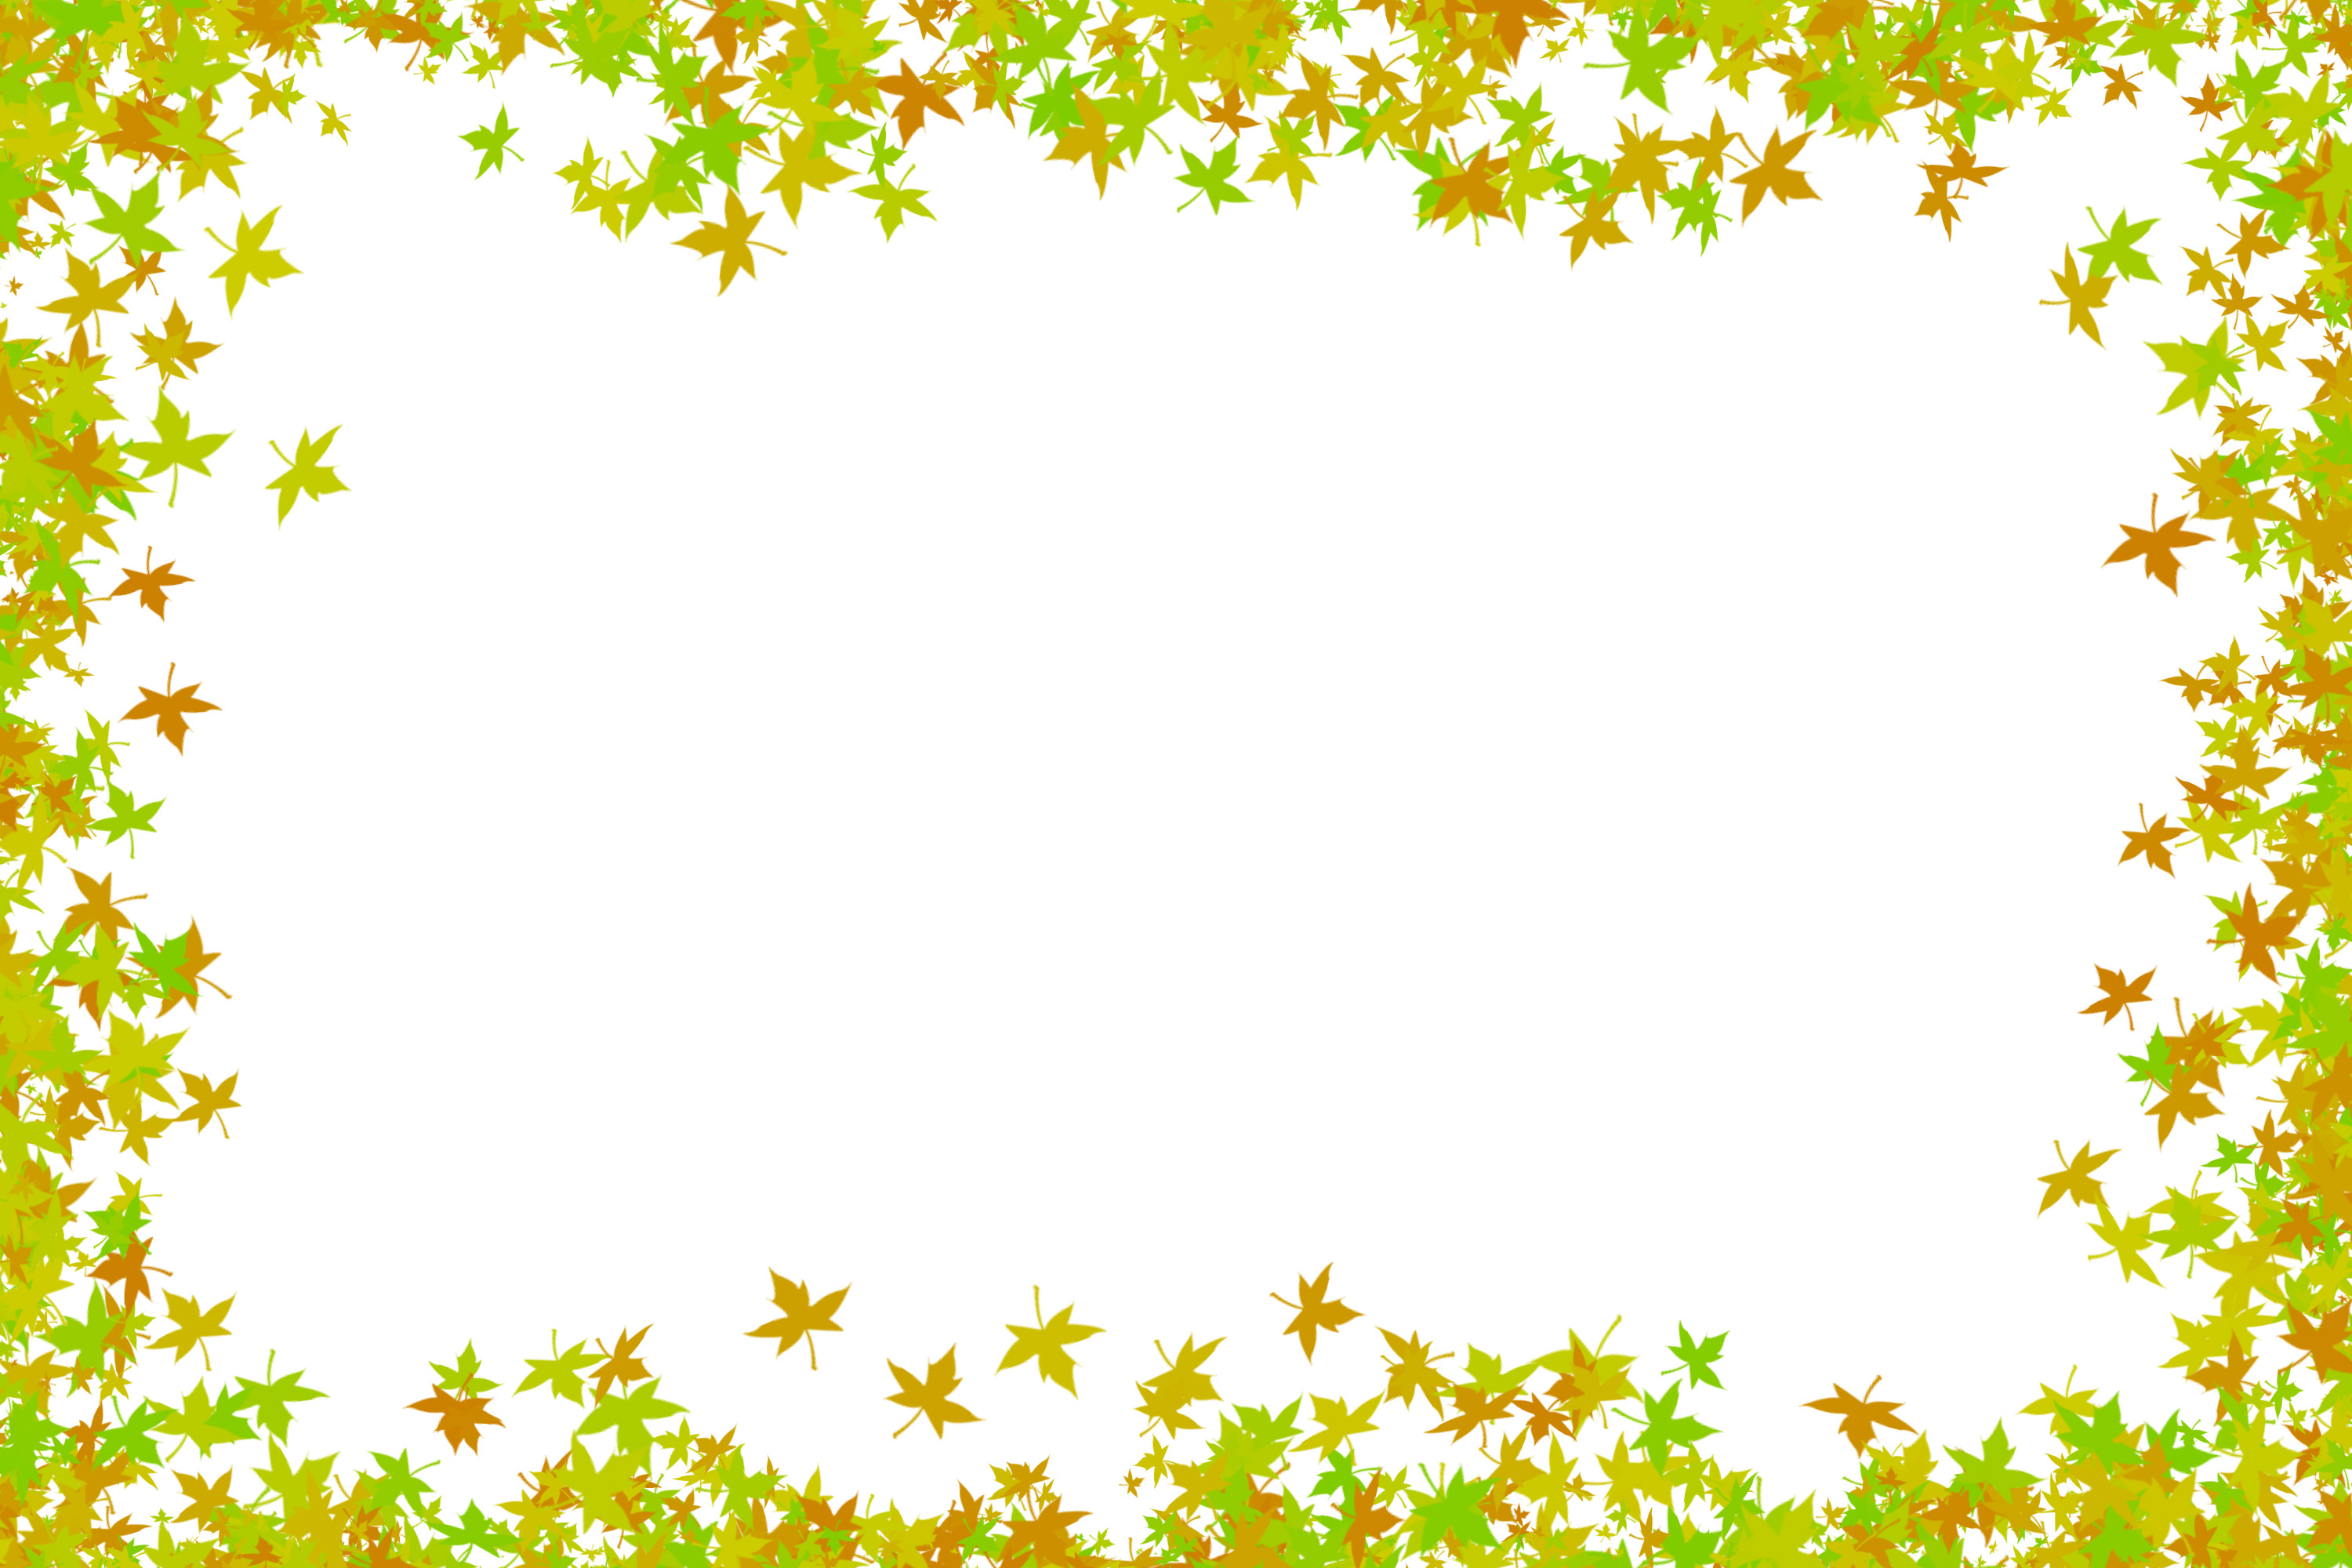 maple leaves frame | Free backgrounds and textures | Cr103.com